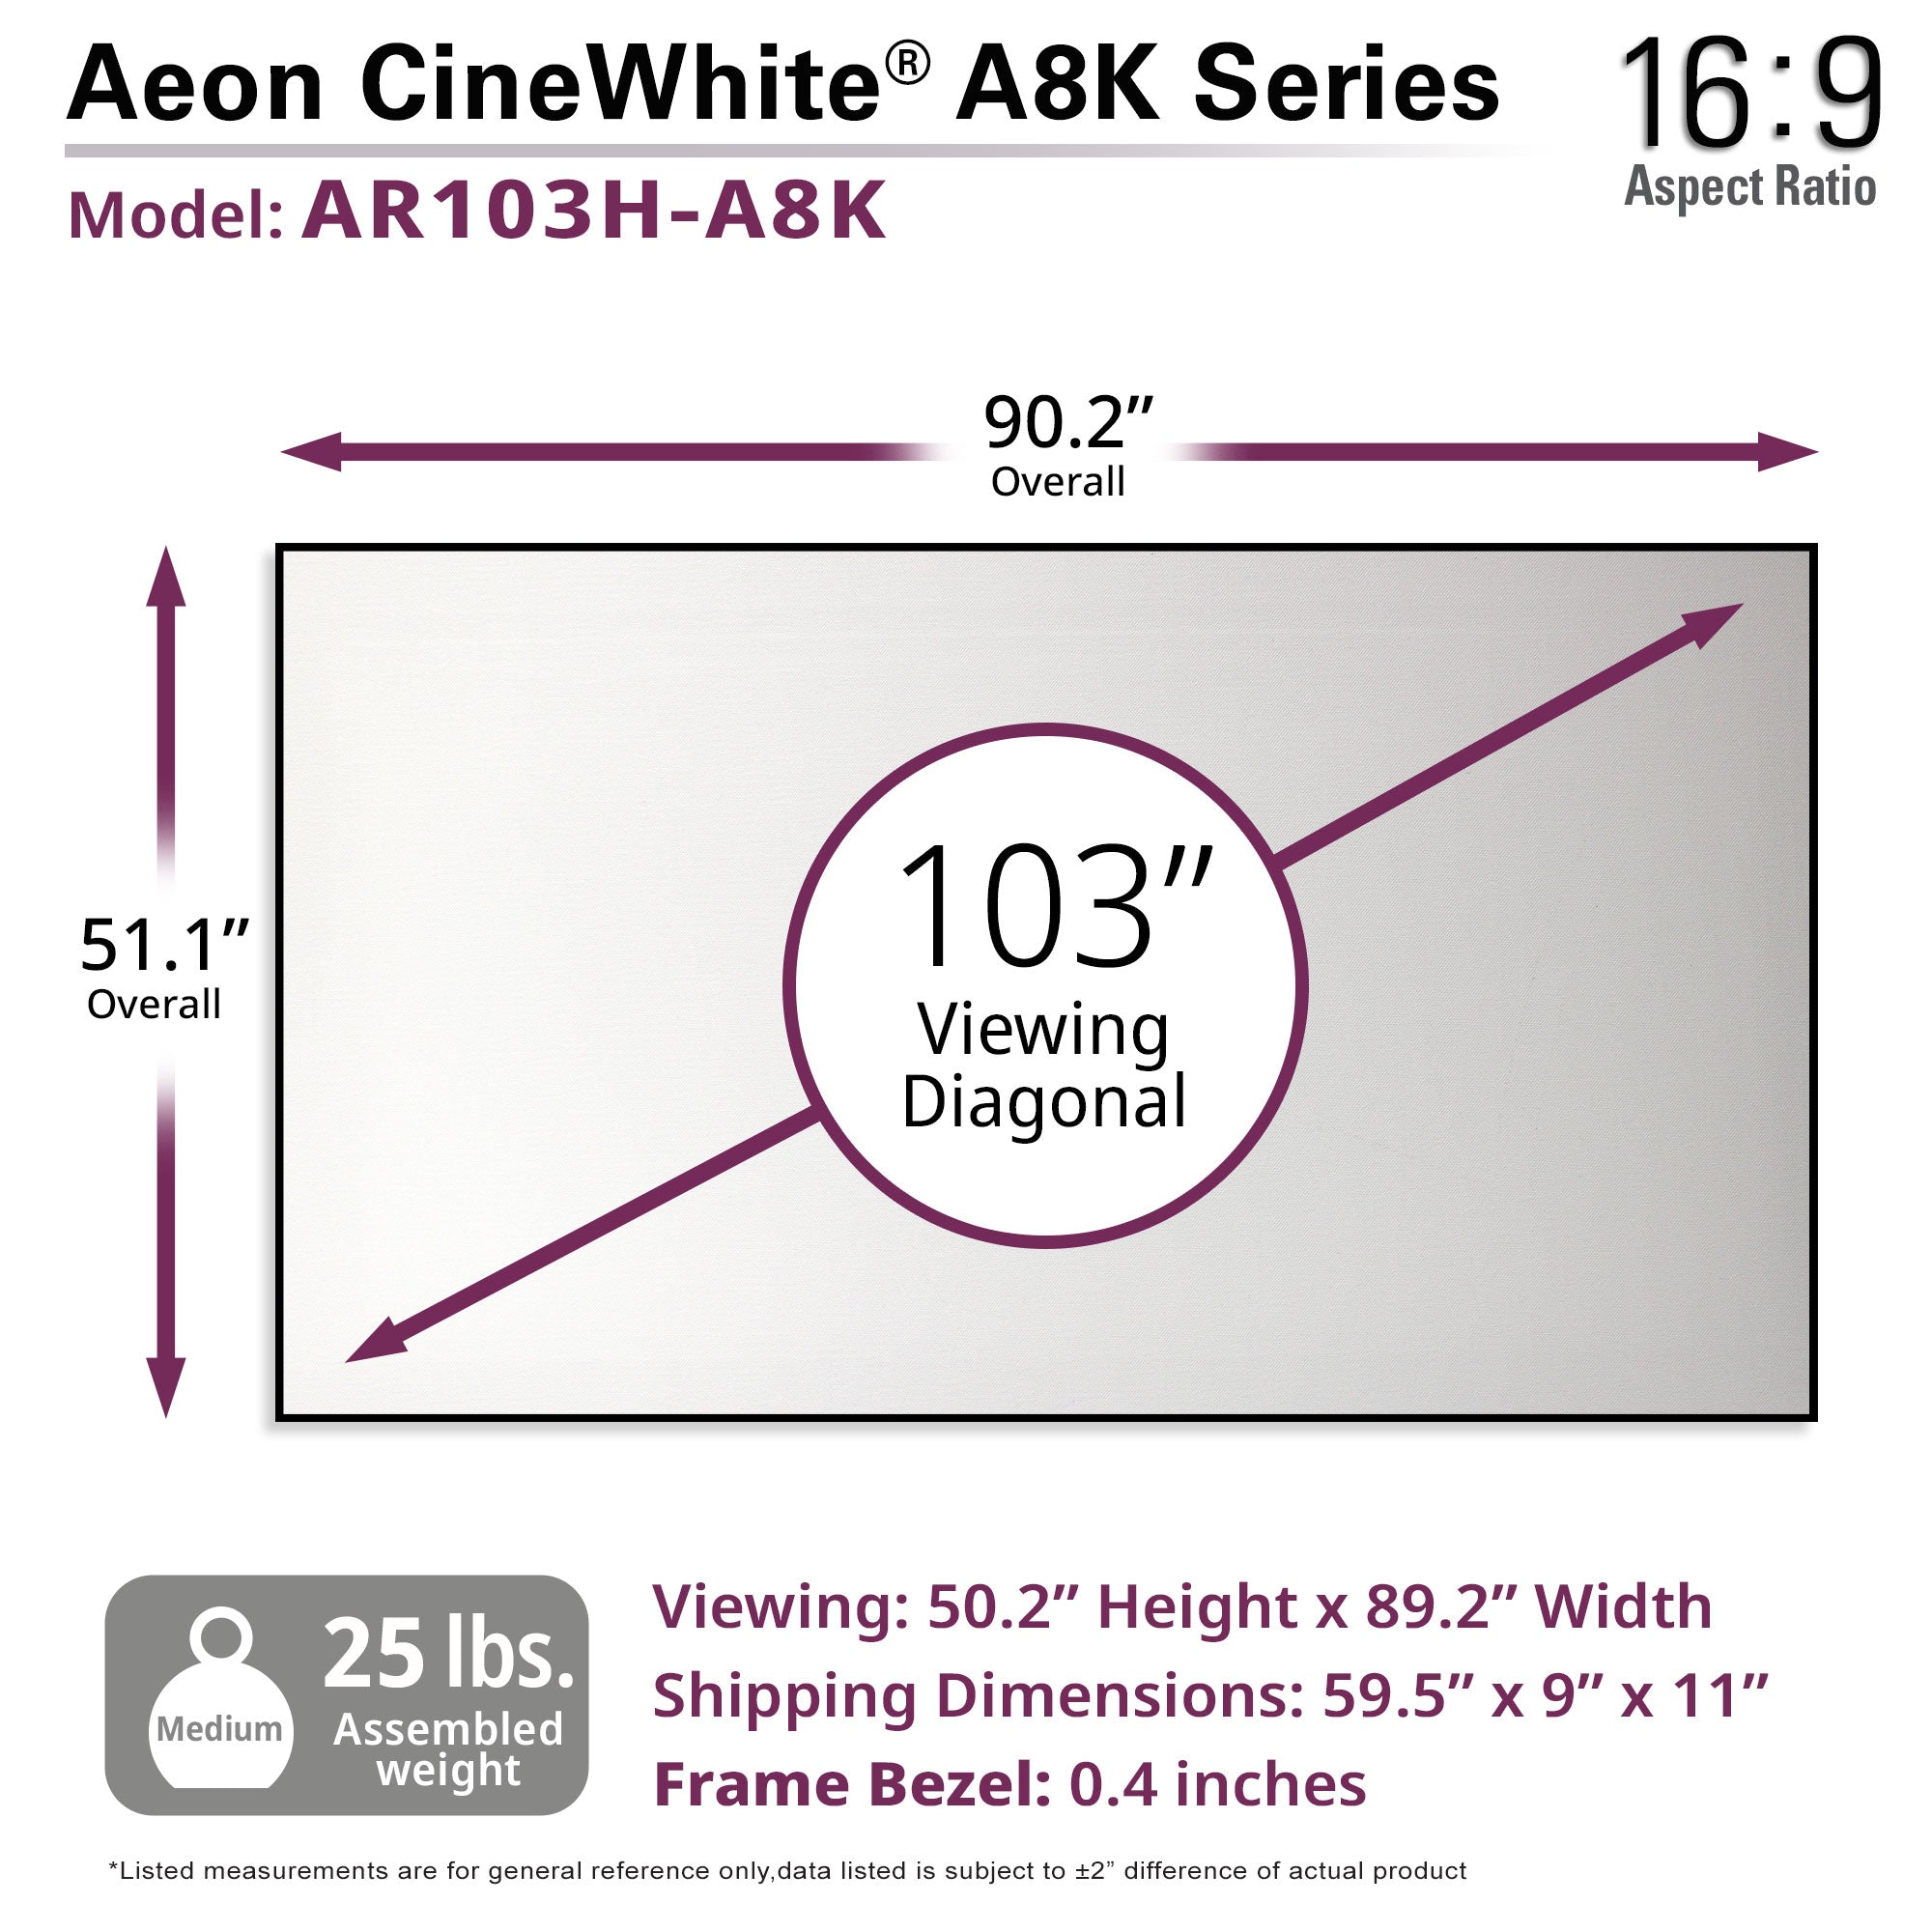 Elite Screens Aeon CineWhite® A8K 103" Diag. 16:9 8K Ultra HD Home Theater Fixed Frame EDGE FREE® Projection Sound Transparent Perforated Weaved Projection Screen, AR103H-A8K